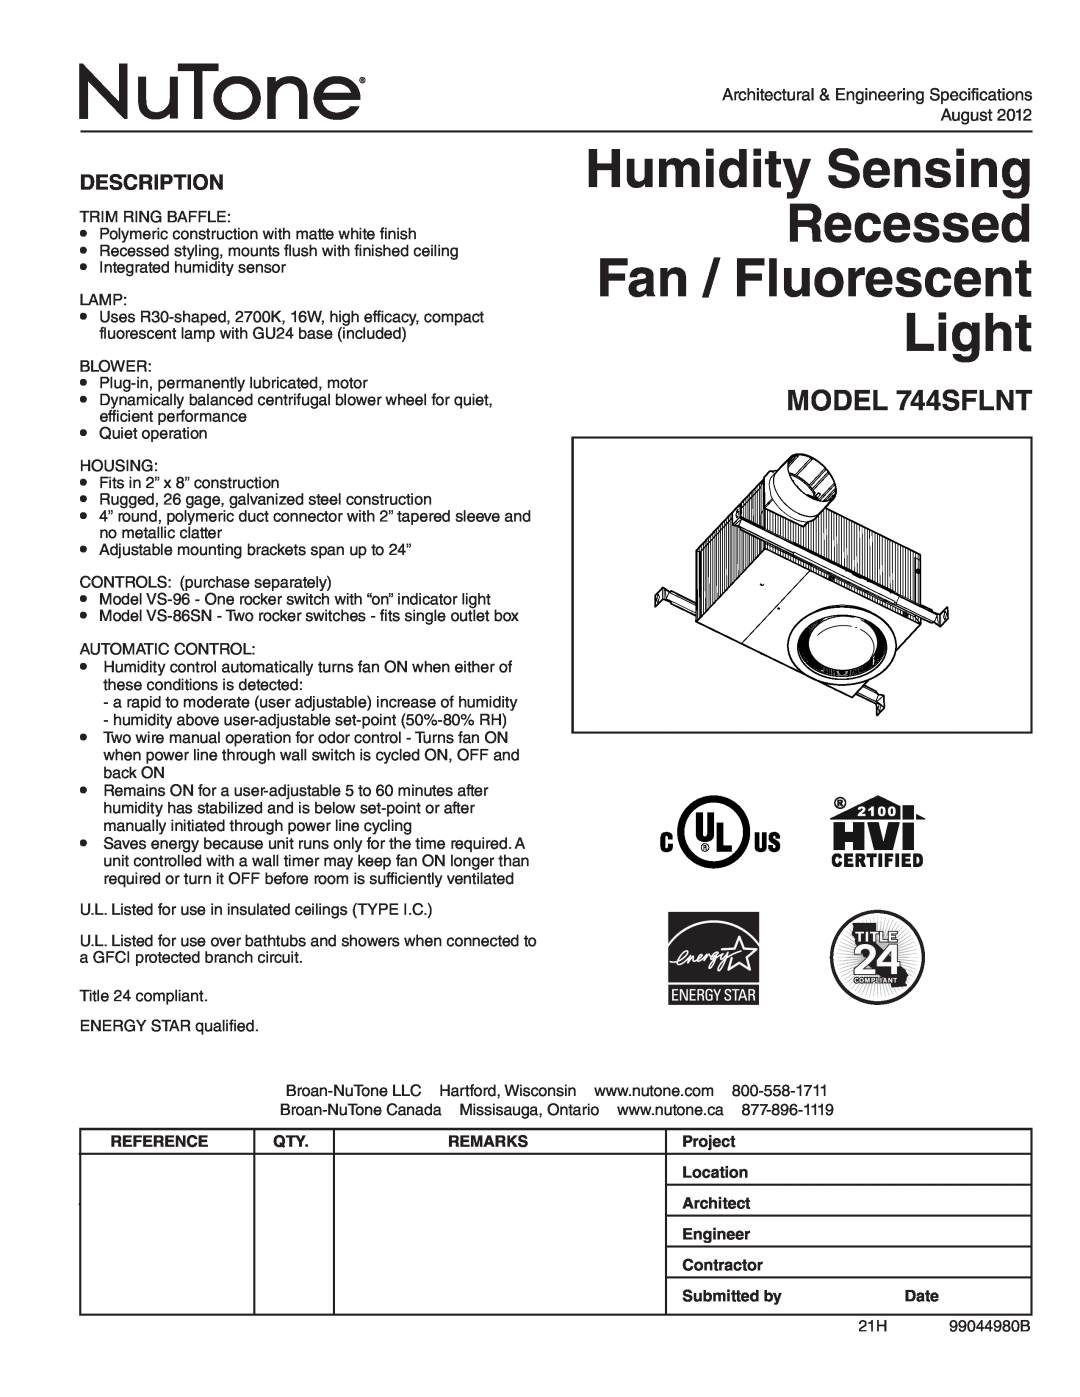 NuTone 744FLNT warranty Recessed Fluorescent Fan / Light, Read And Save These Instructions, Operation, Cleaning, Warranty 